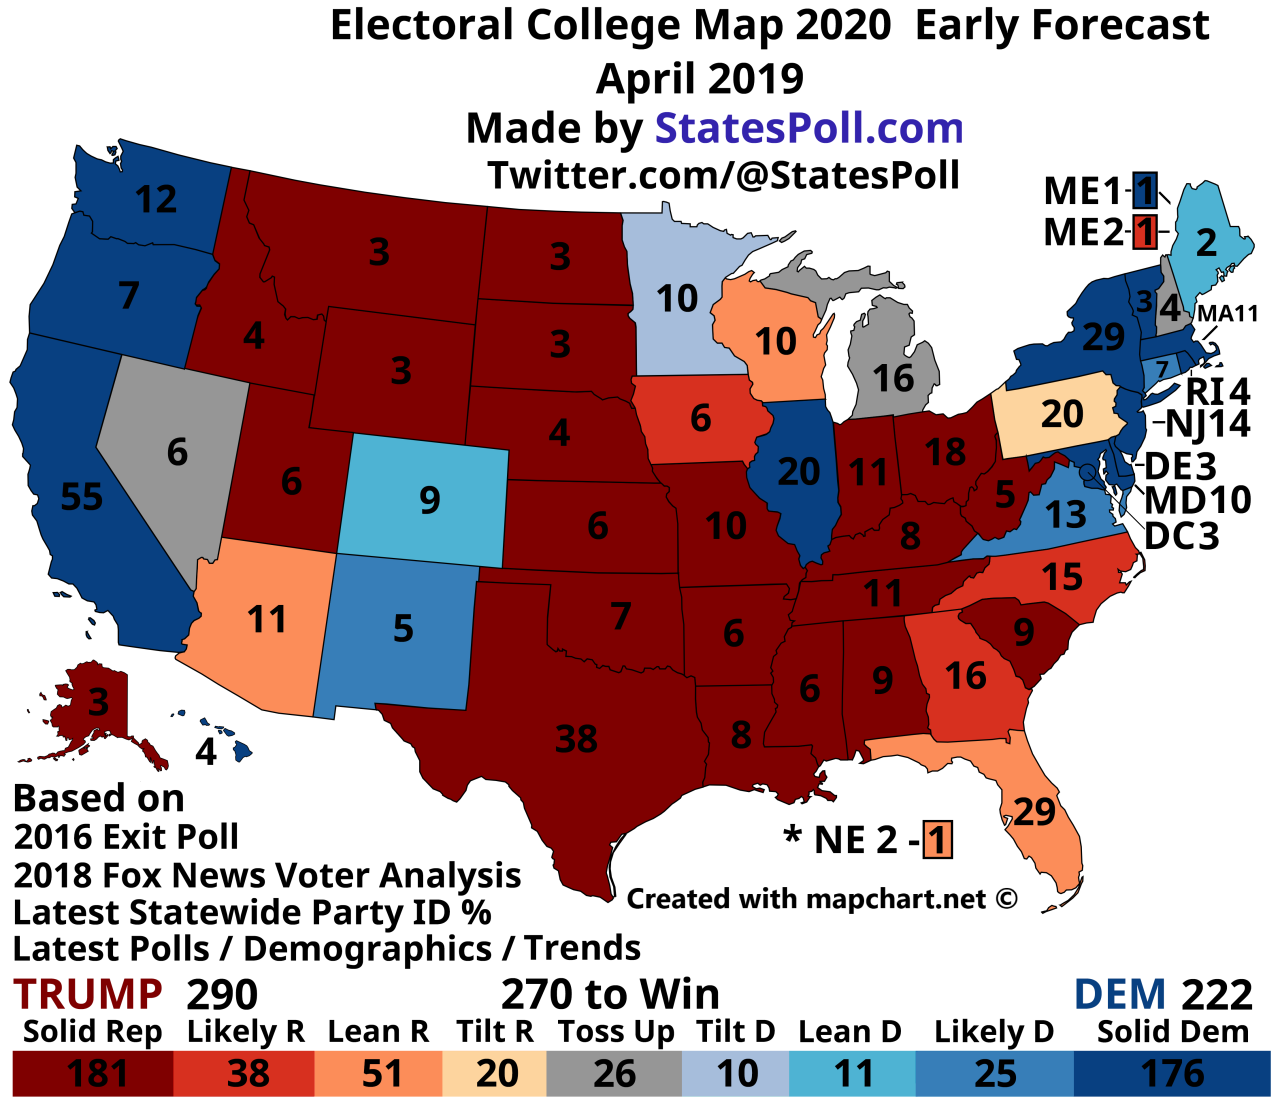 Presidential Election 2020 Electoral College Map